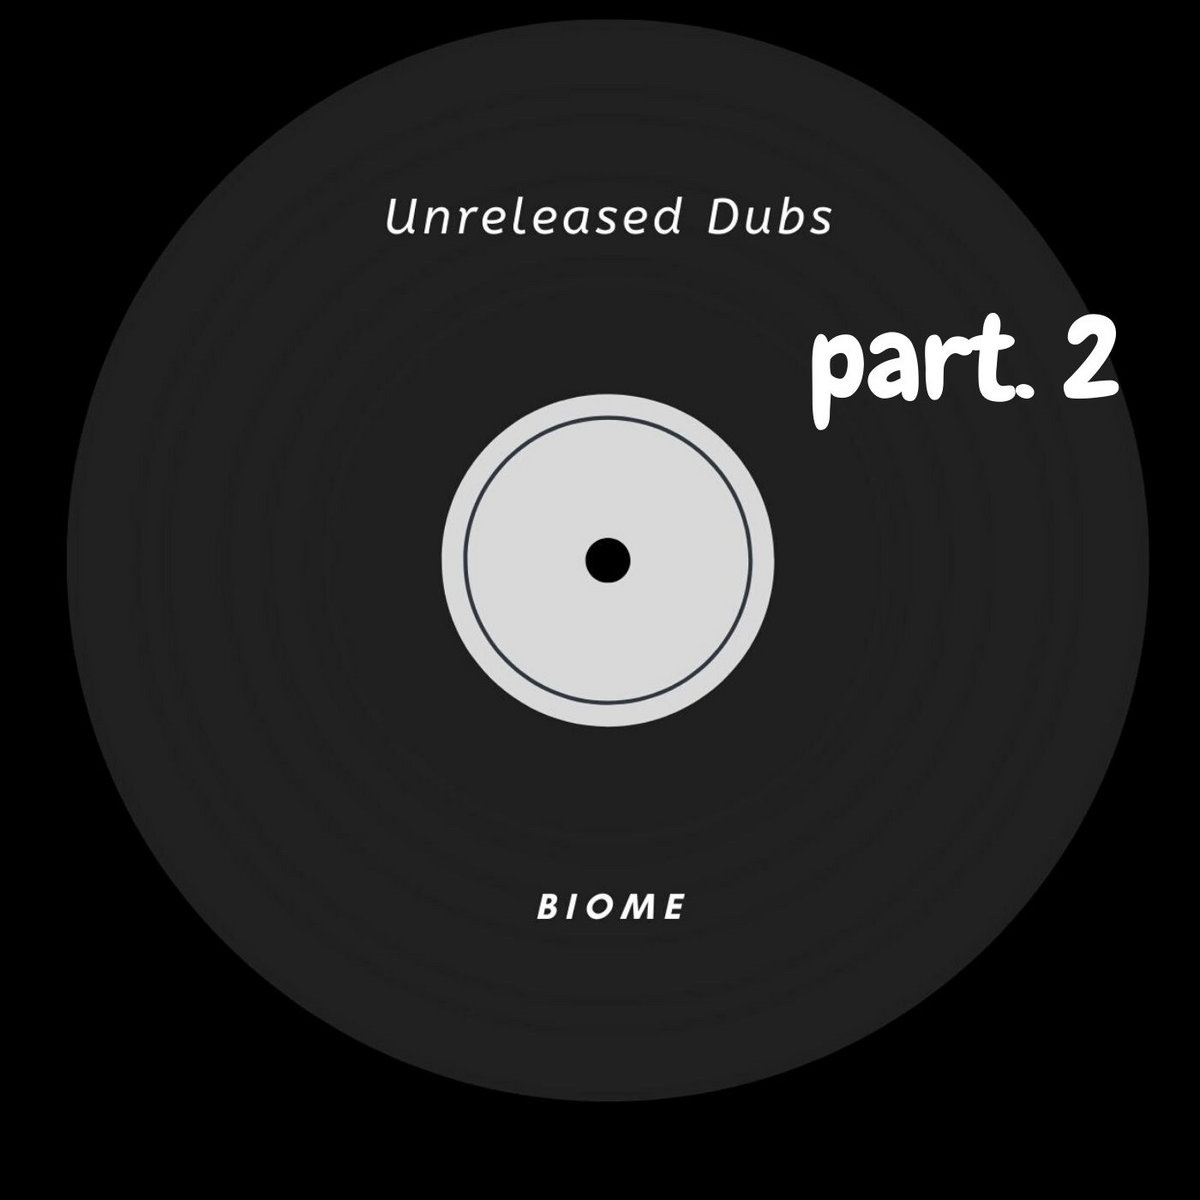 Biome – Unreleased Dubs part. 2